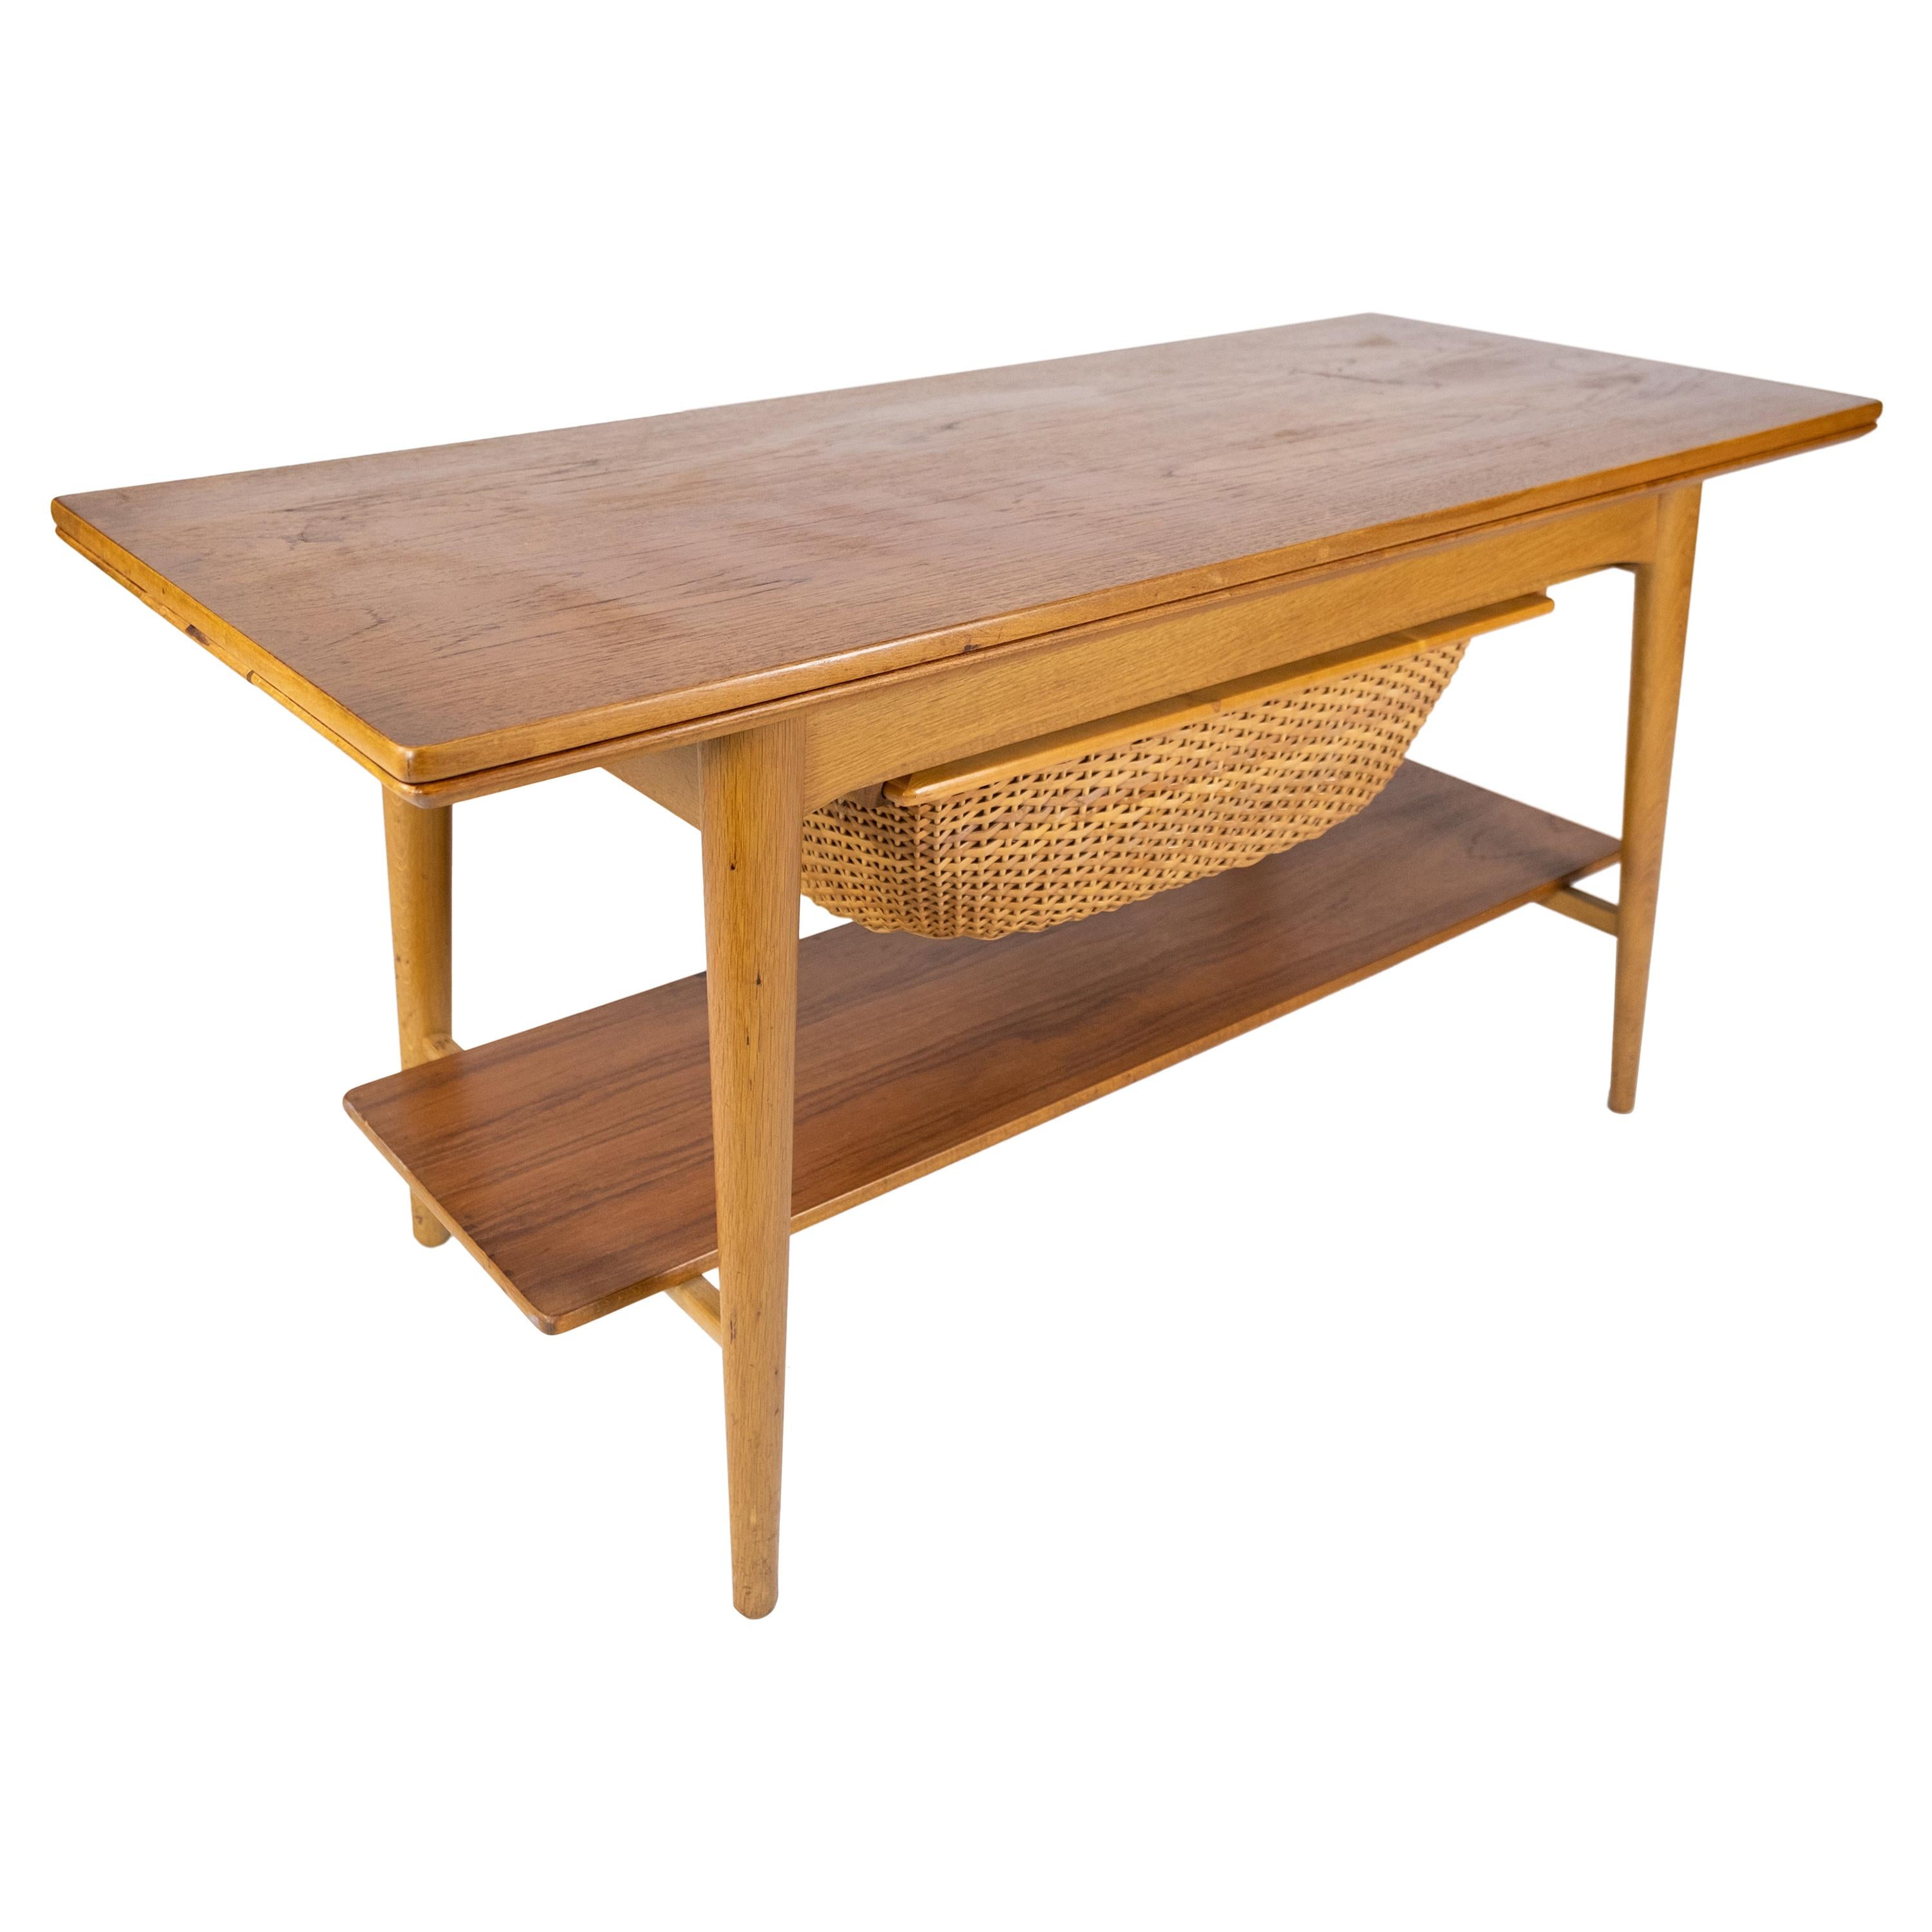 Coffee & Sewing Table Made In Oak & Teak, Danish Design From 1960s